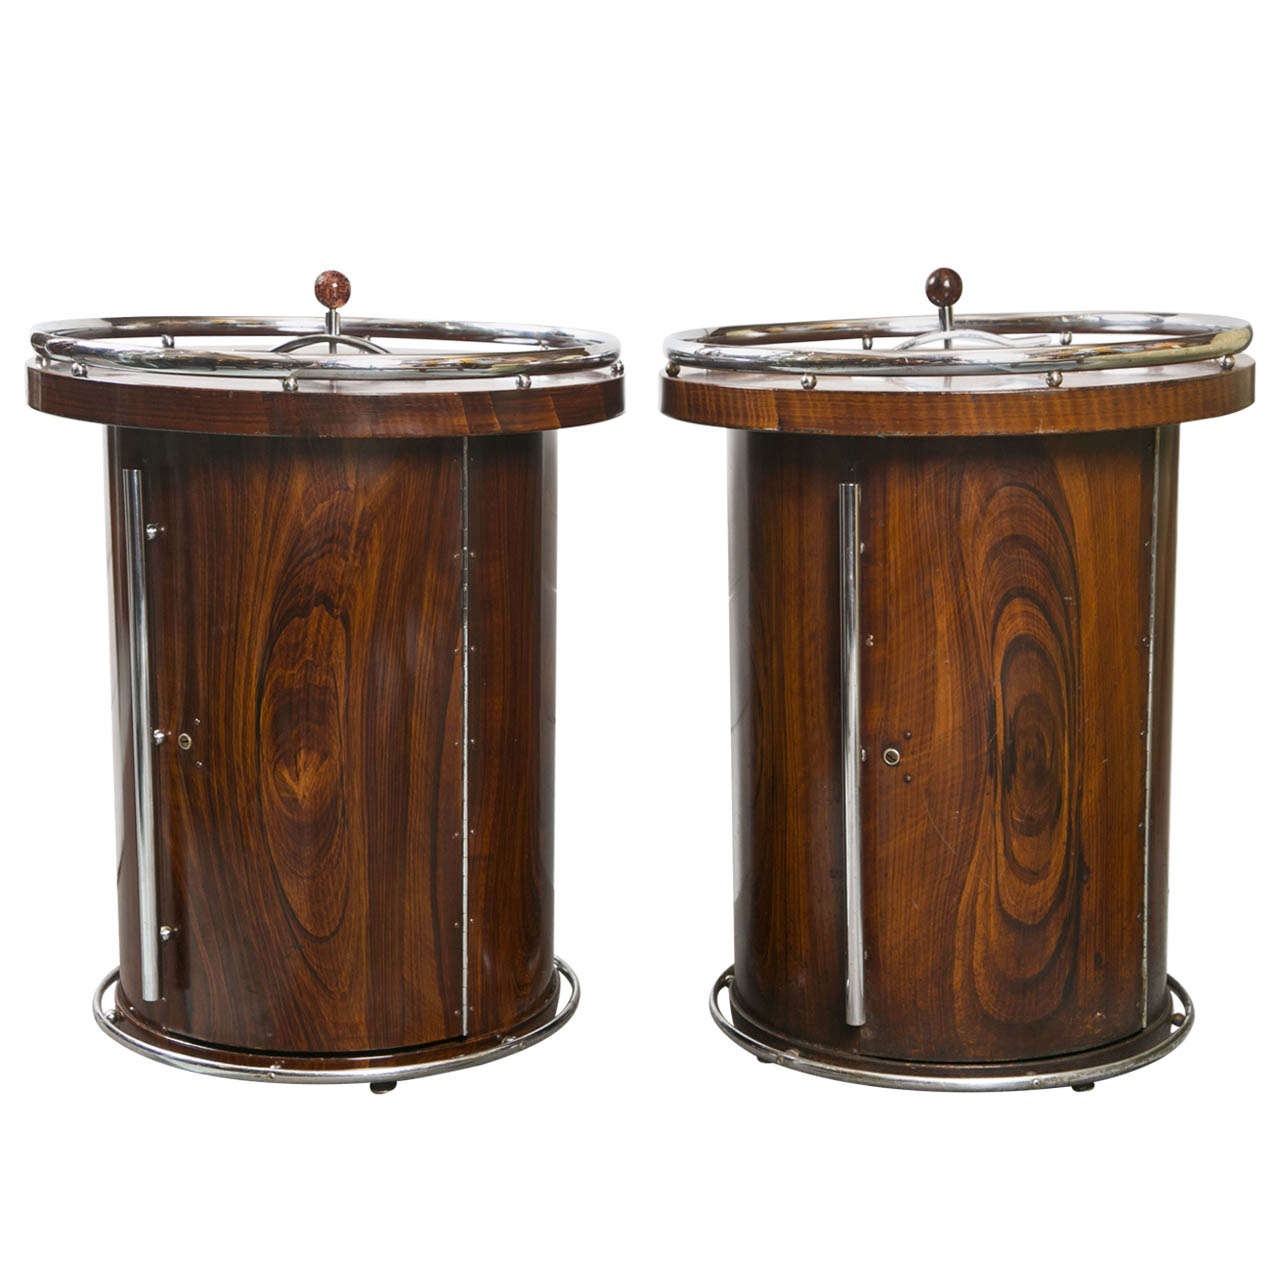 Pair of Art Deco Style Bar Pipe Holder Cabinets End Tables With Chrome Accents